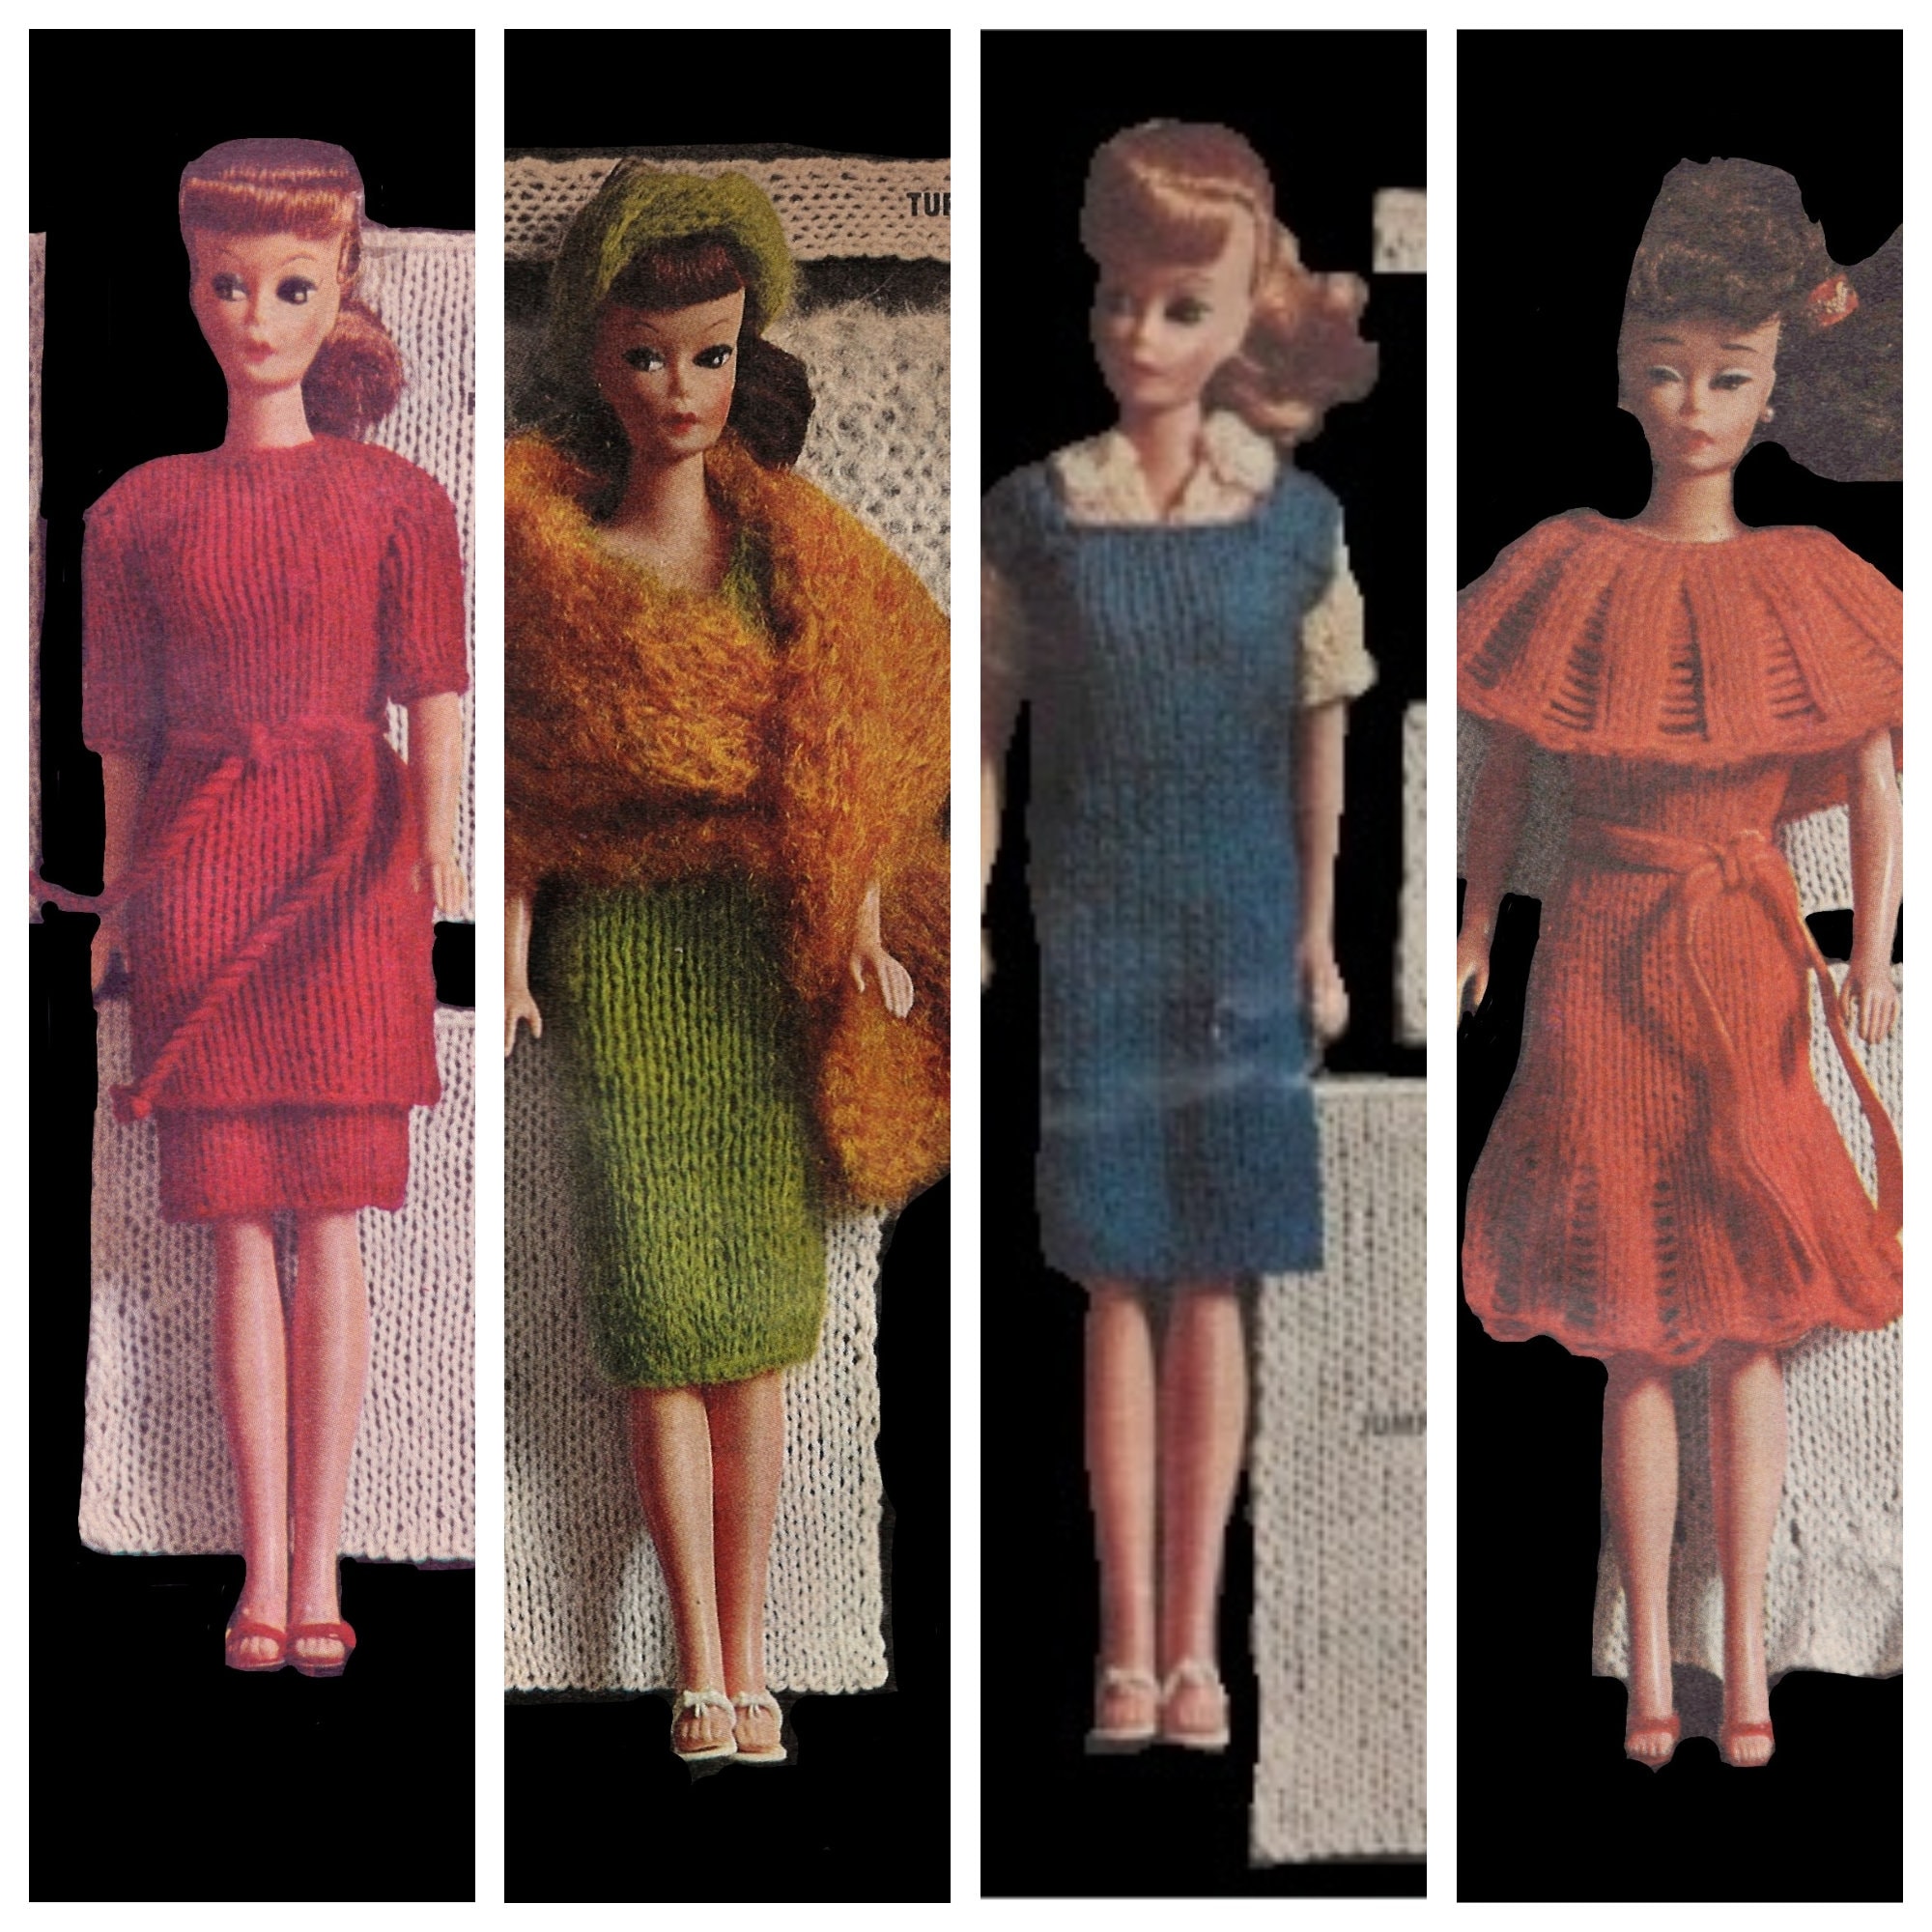 Barbie Fashionista Barbie Clothes Summer Dresses Knitting Pattern 